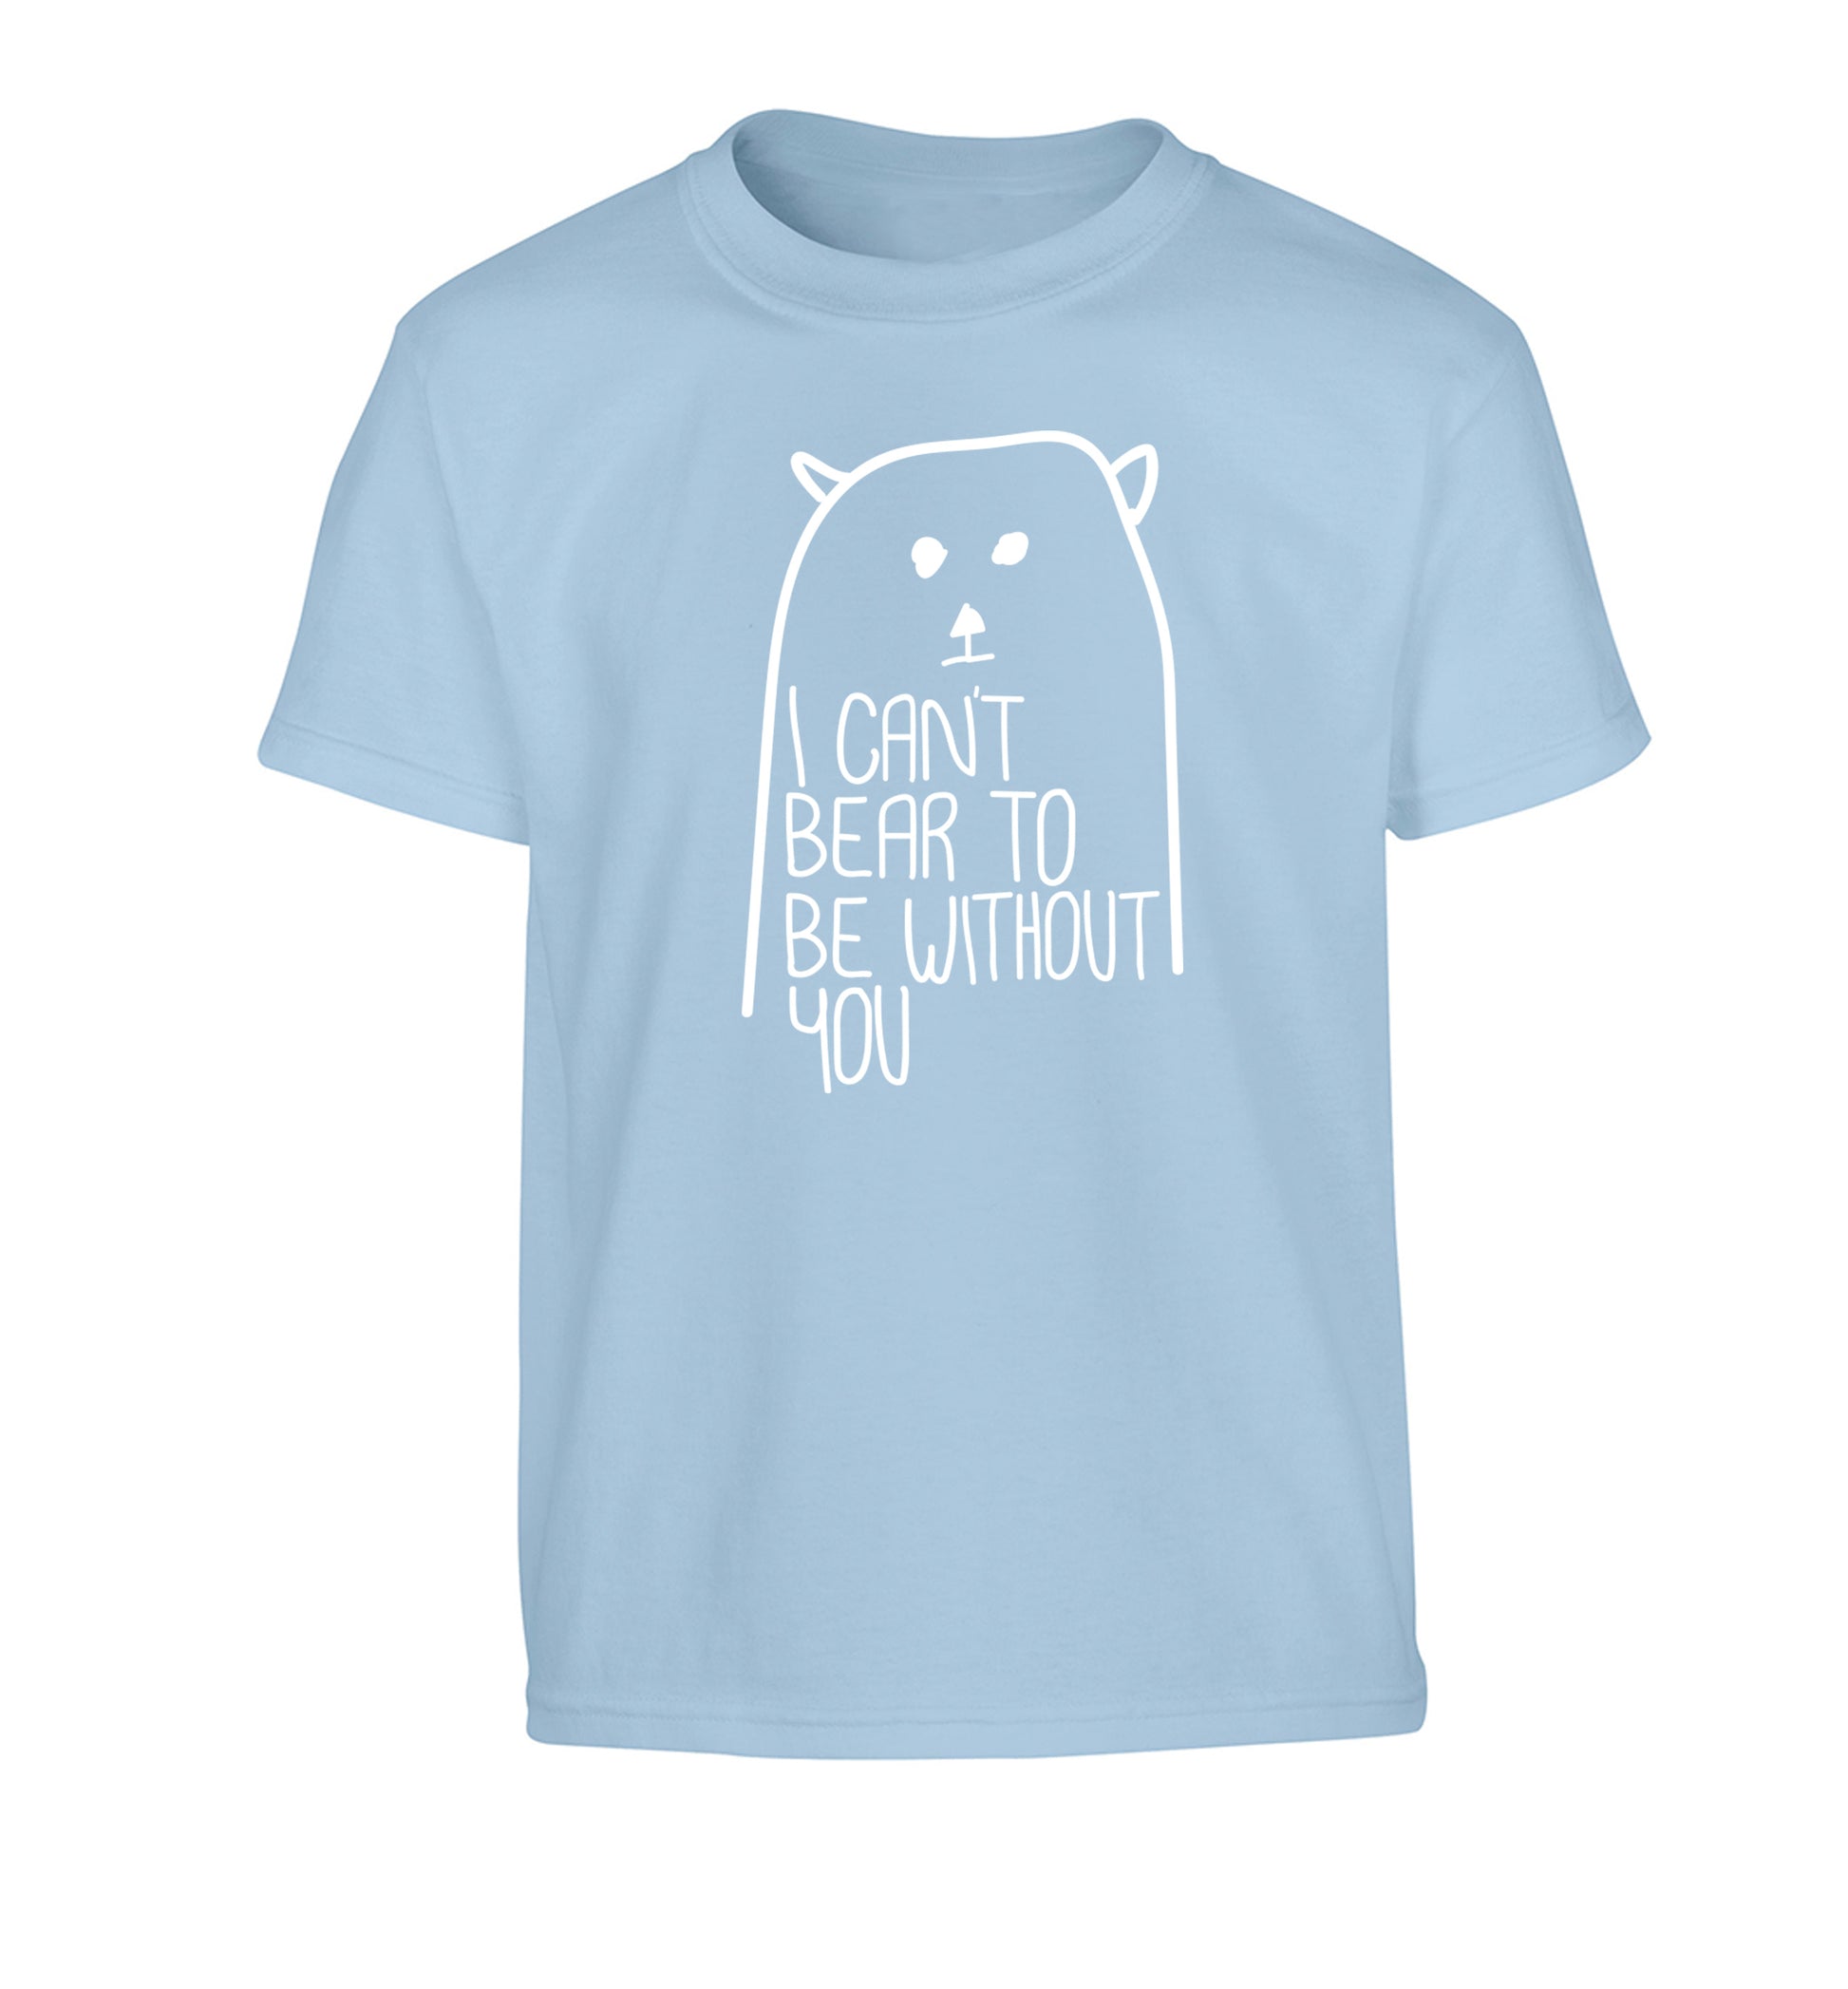 I can't bear to be without you Children's light blue Tshirt 12-13 Years